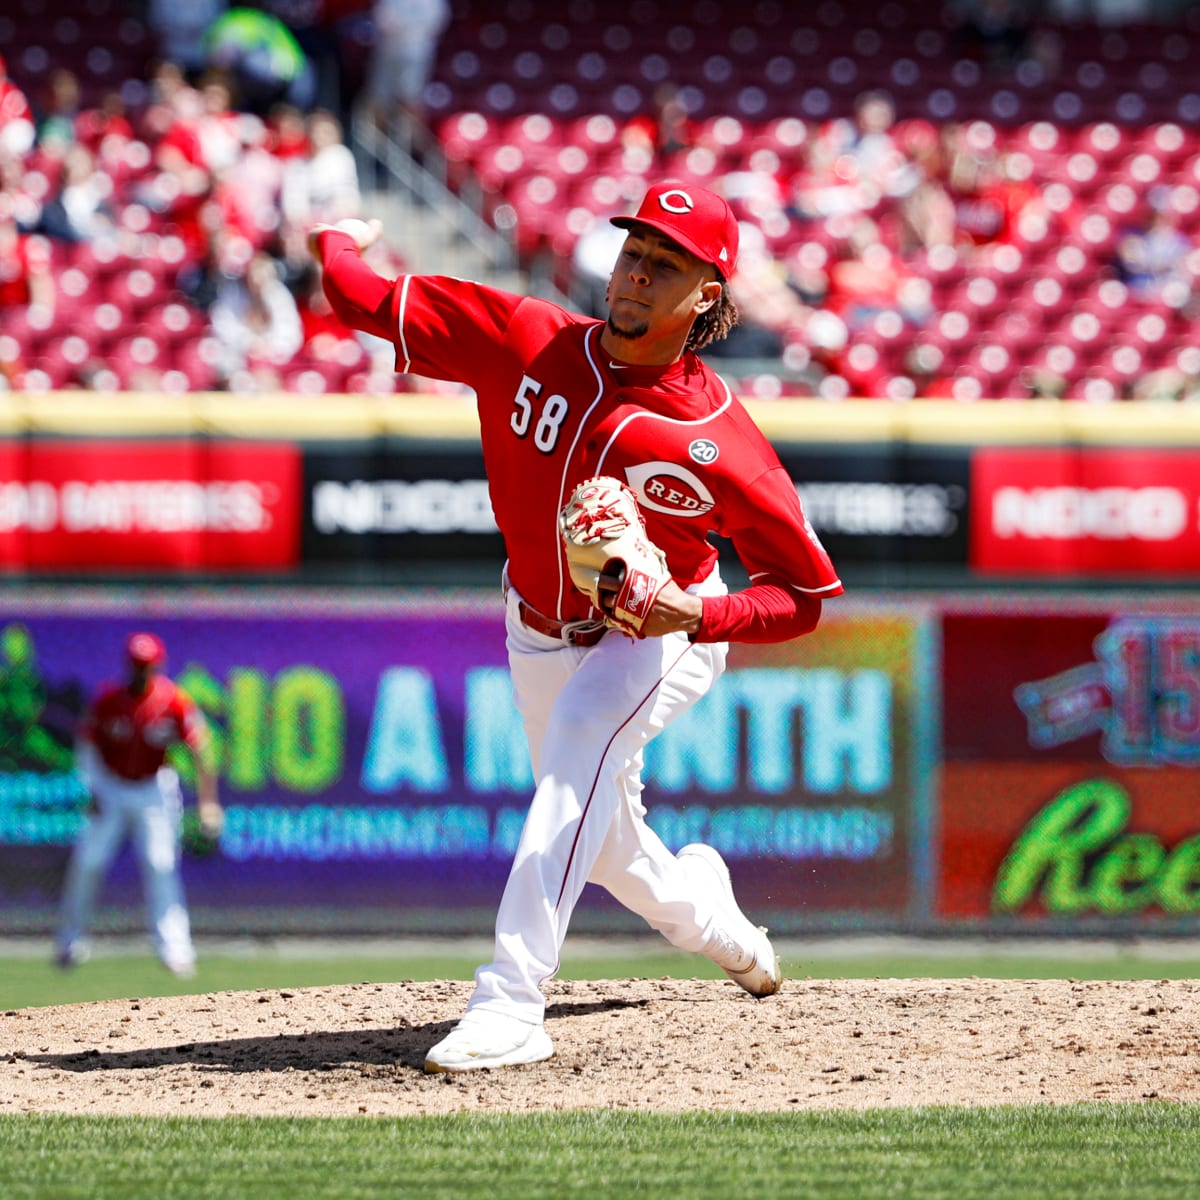 Luis Castillo postgame on Reds' pitching staff: 'We're all a family' 